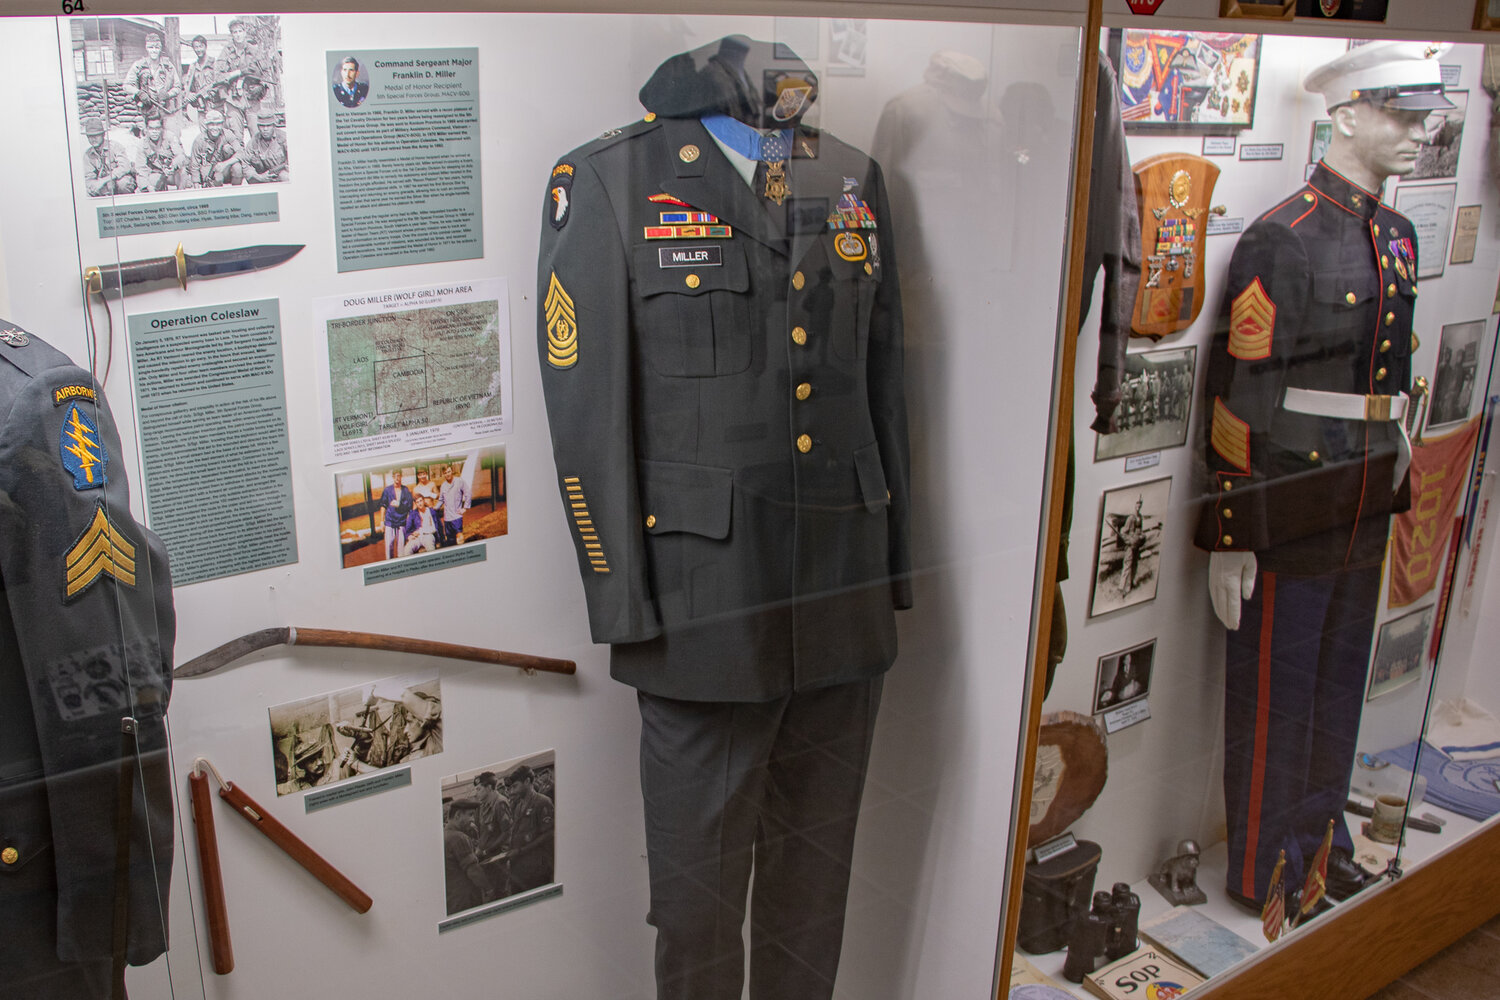 A new display at the Veterans Memorial Museum in Chehalis is seen on Friday, Jan. 5, featuring the Medal of Honor of Vietnam veteran and U.S. Army Green Beret Franklin Douglas Miller.